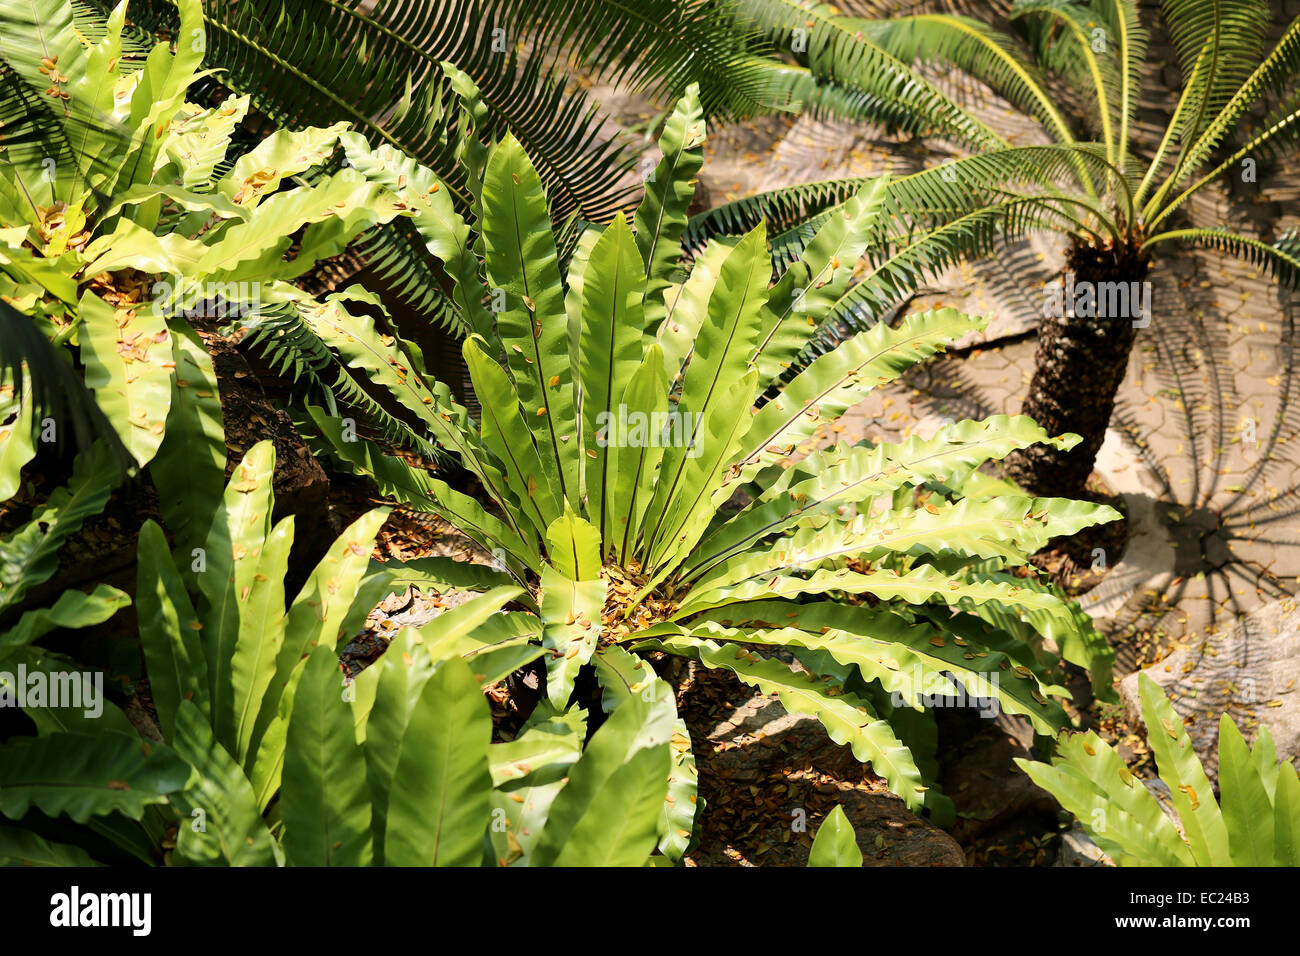 Beautiful green tropical plants photographed close up Stock Photo